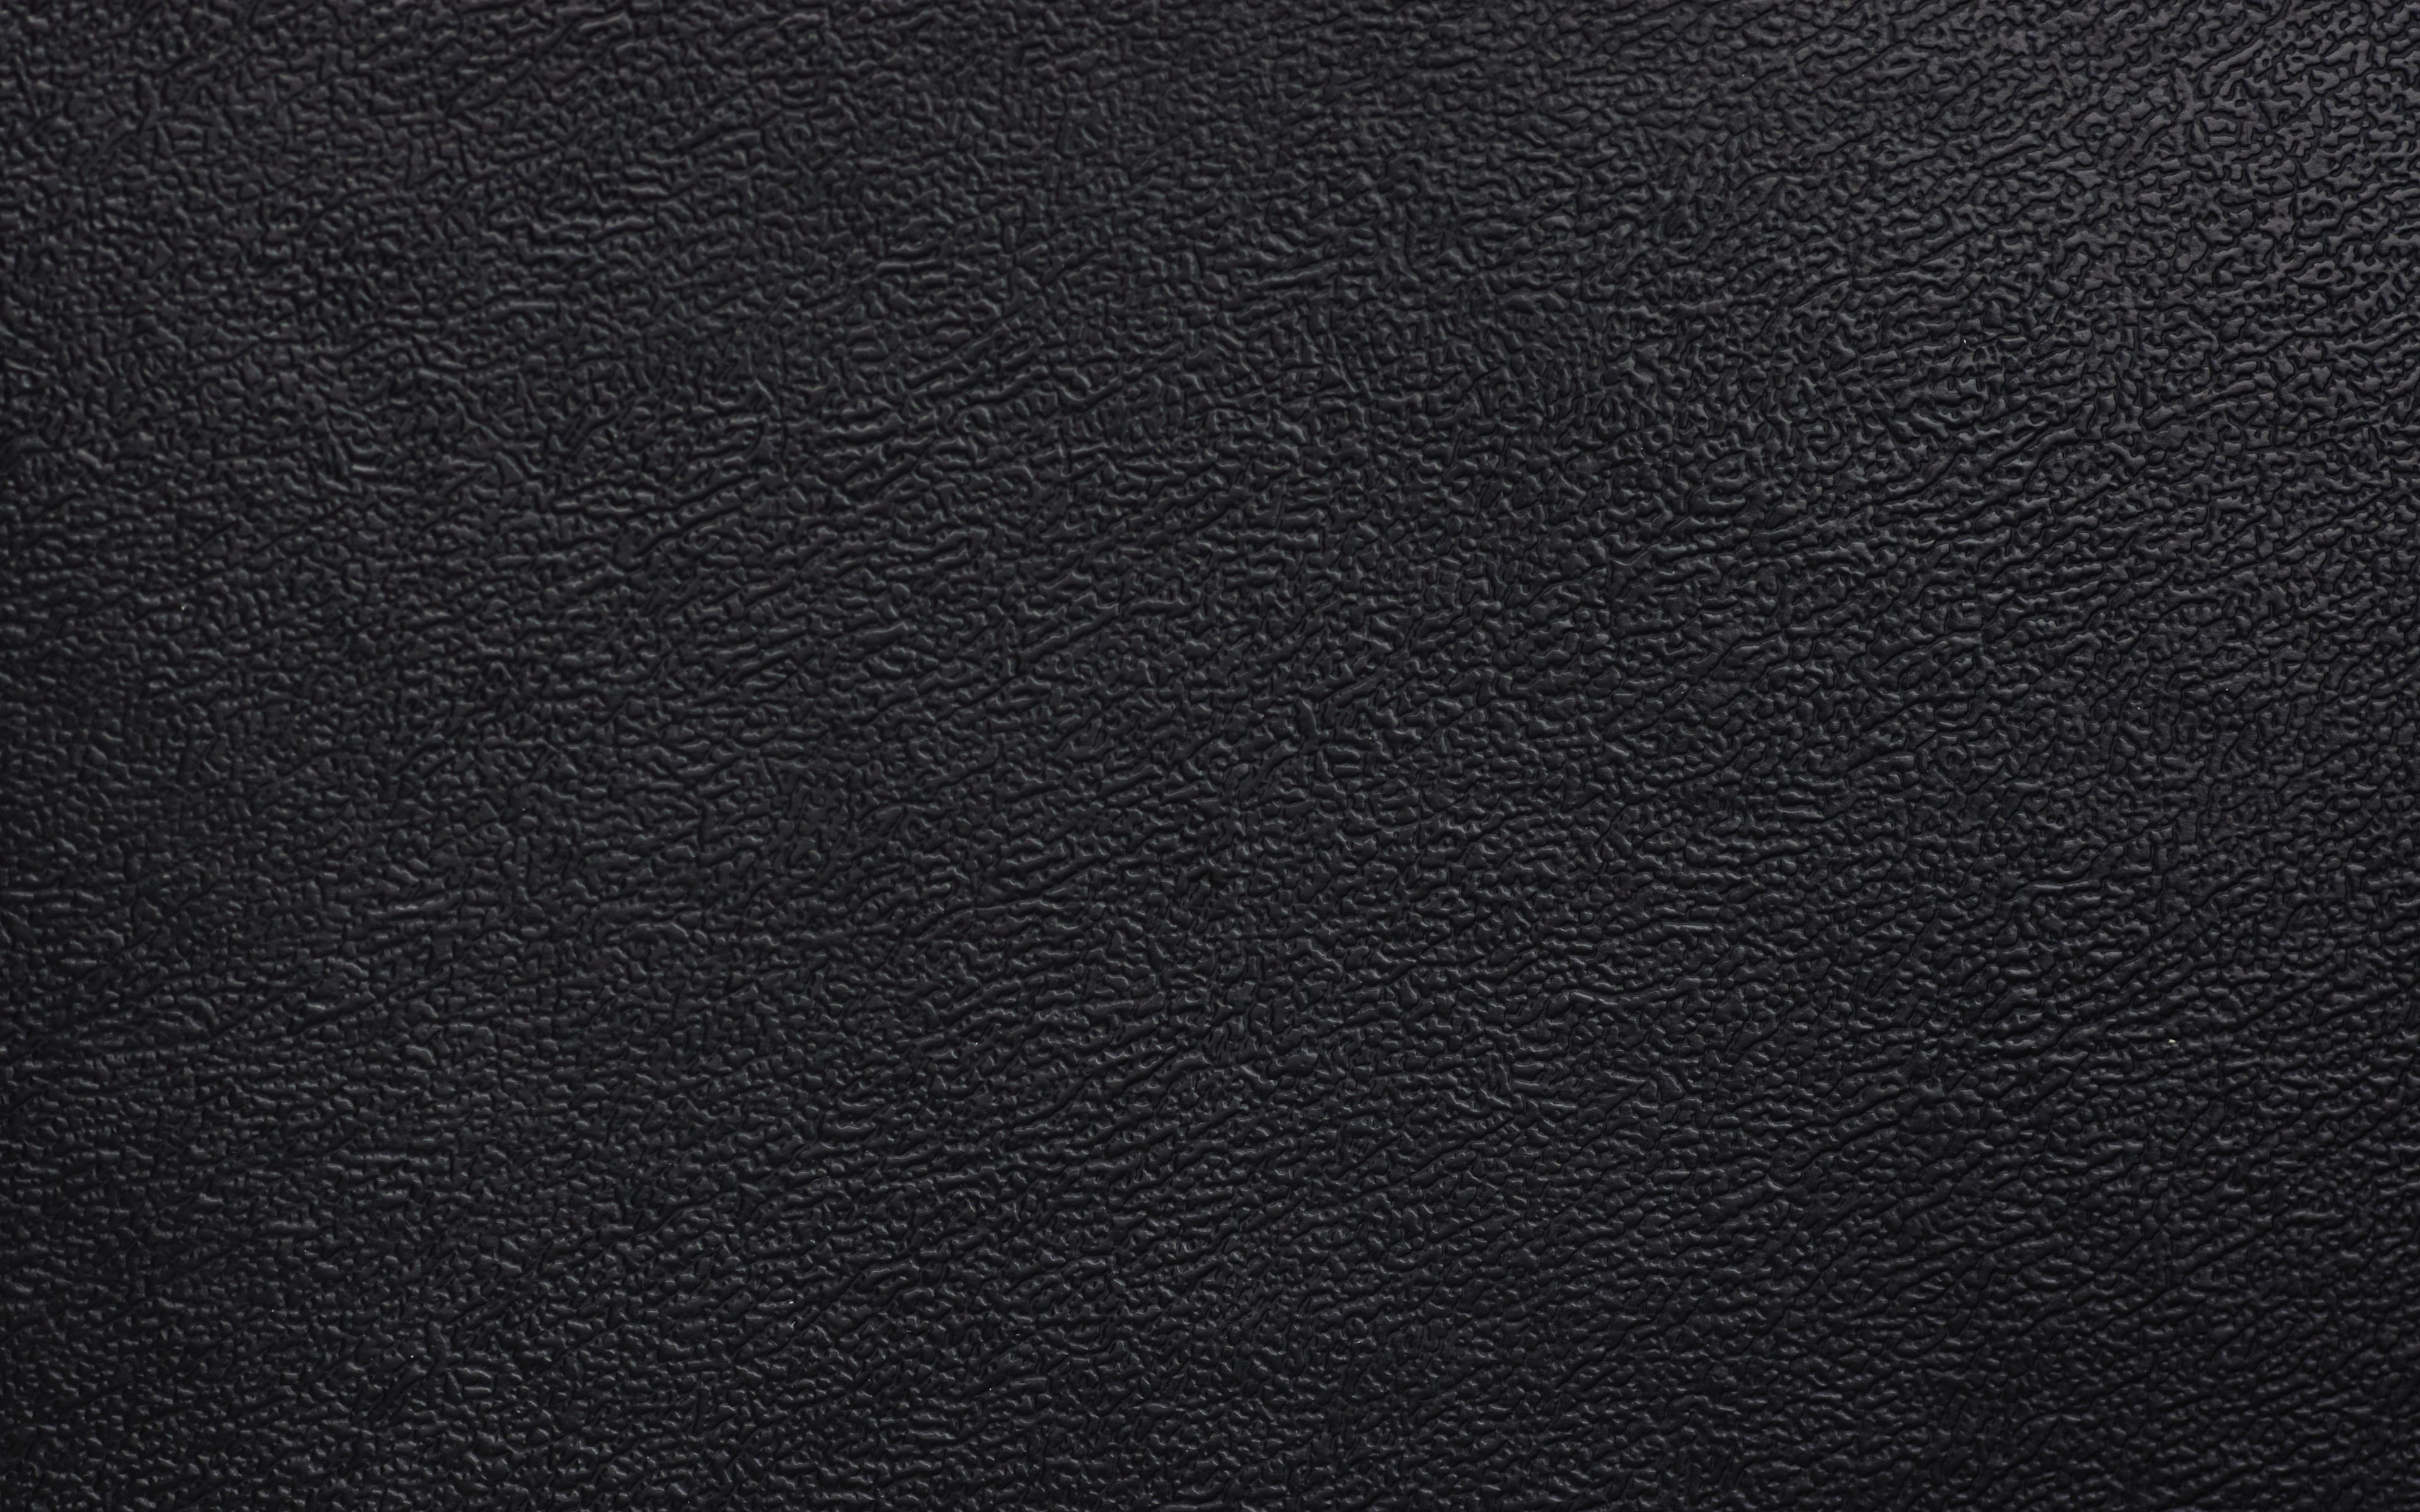 Download wallpaper 3840x2400 texture, leather, relief 4k ultra hd 16:10 ...